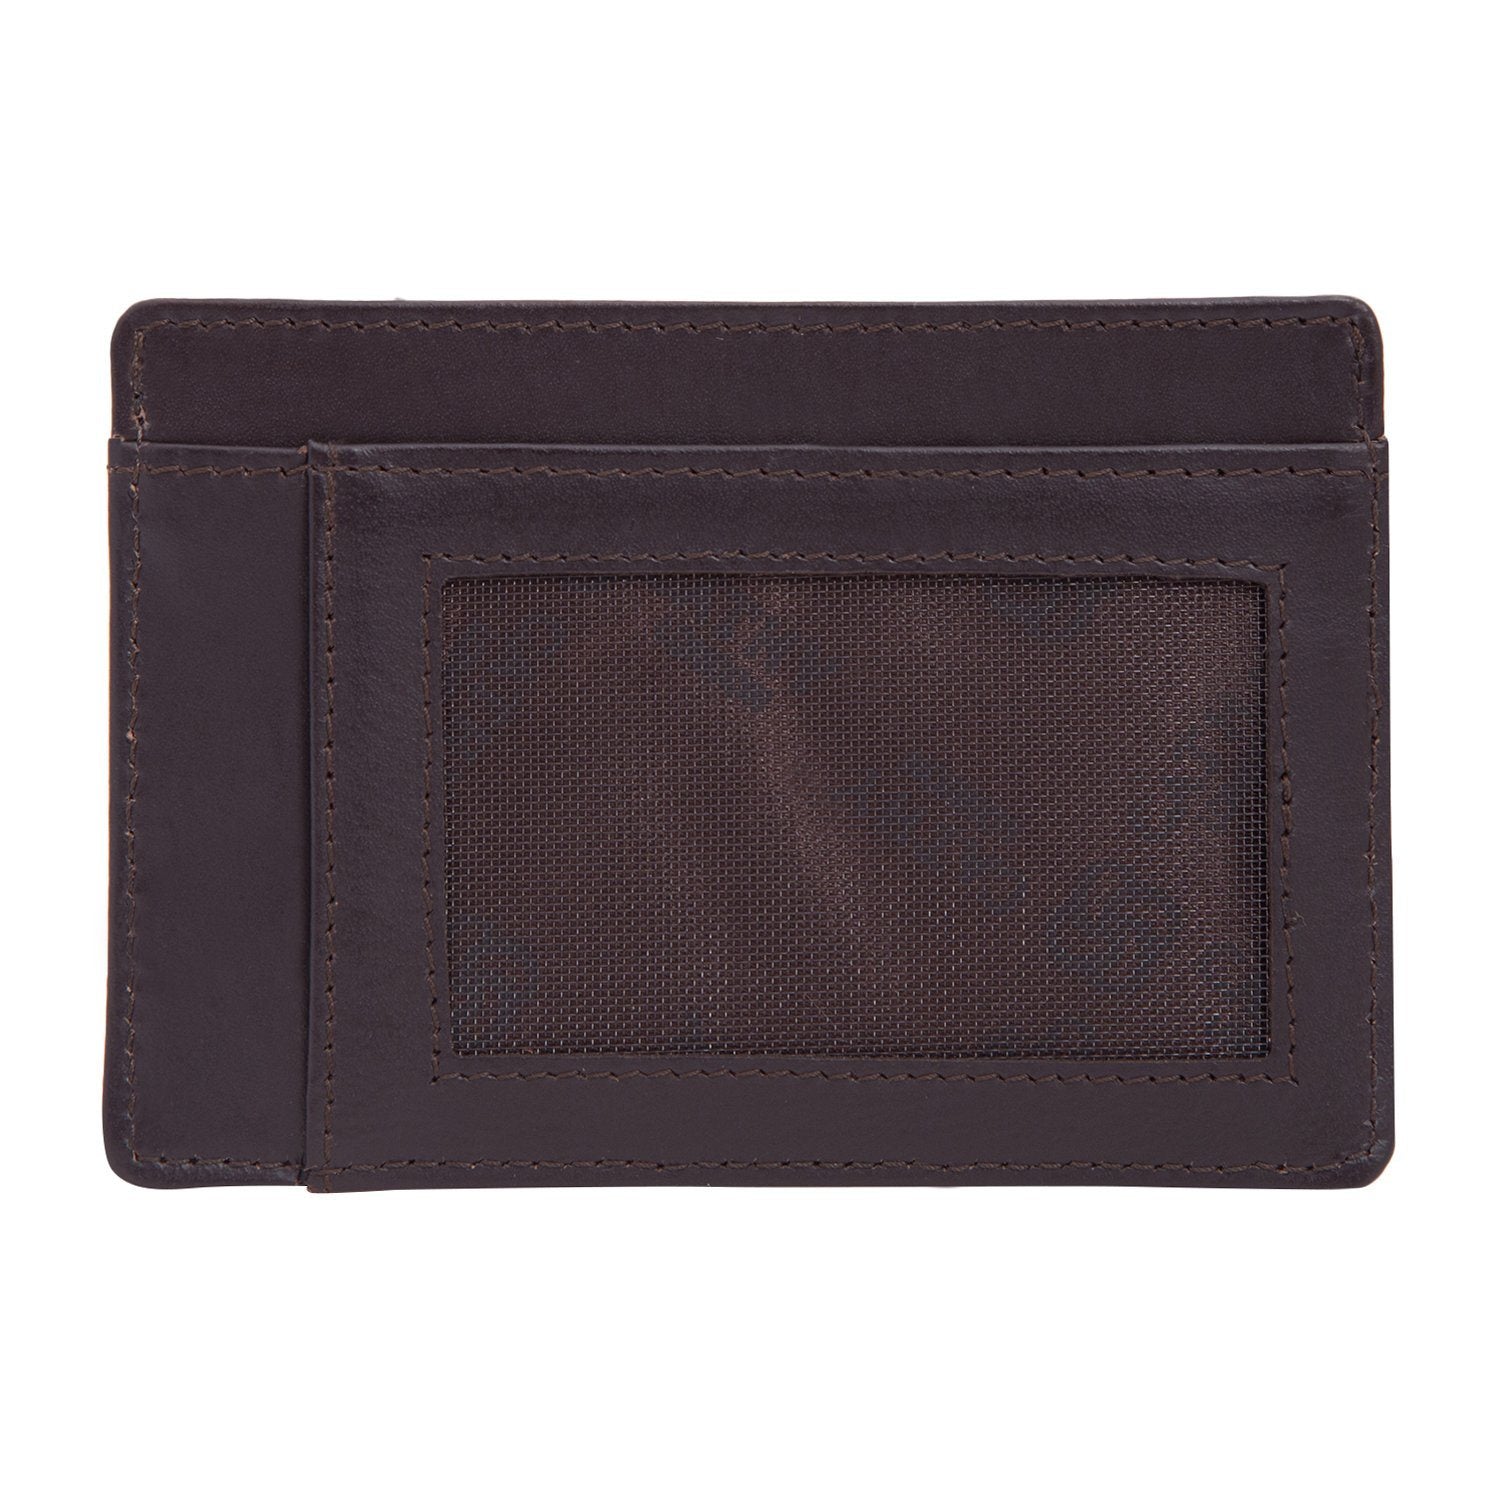 Coffee Colour Italian Leather Slim Wallet/Card Holder (5 Card Slot + 1 ID Slot + Cash Compartment) Cathy London 